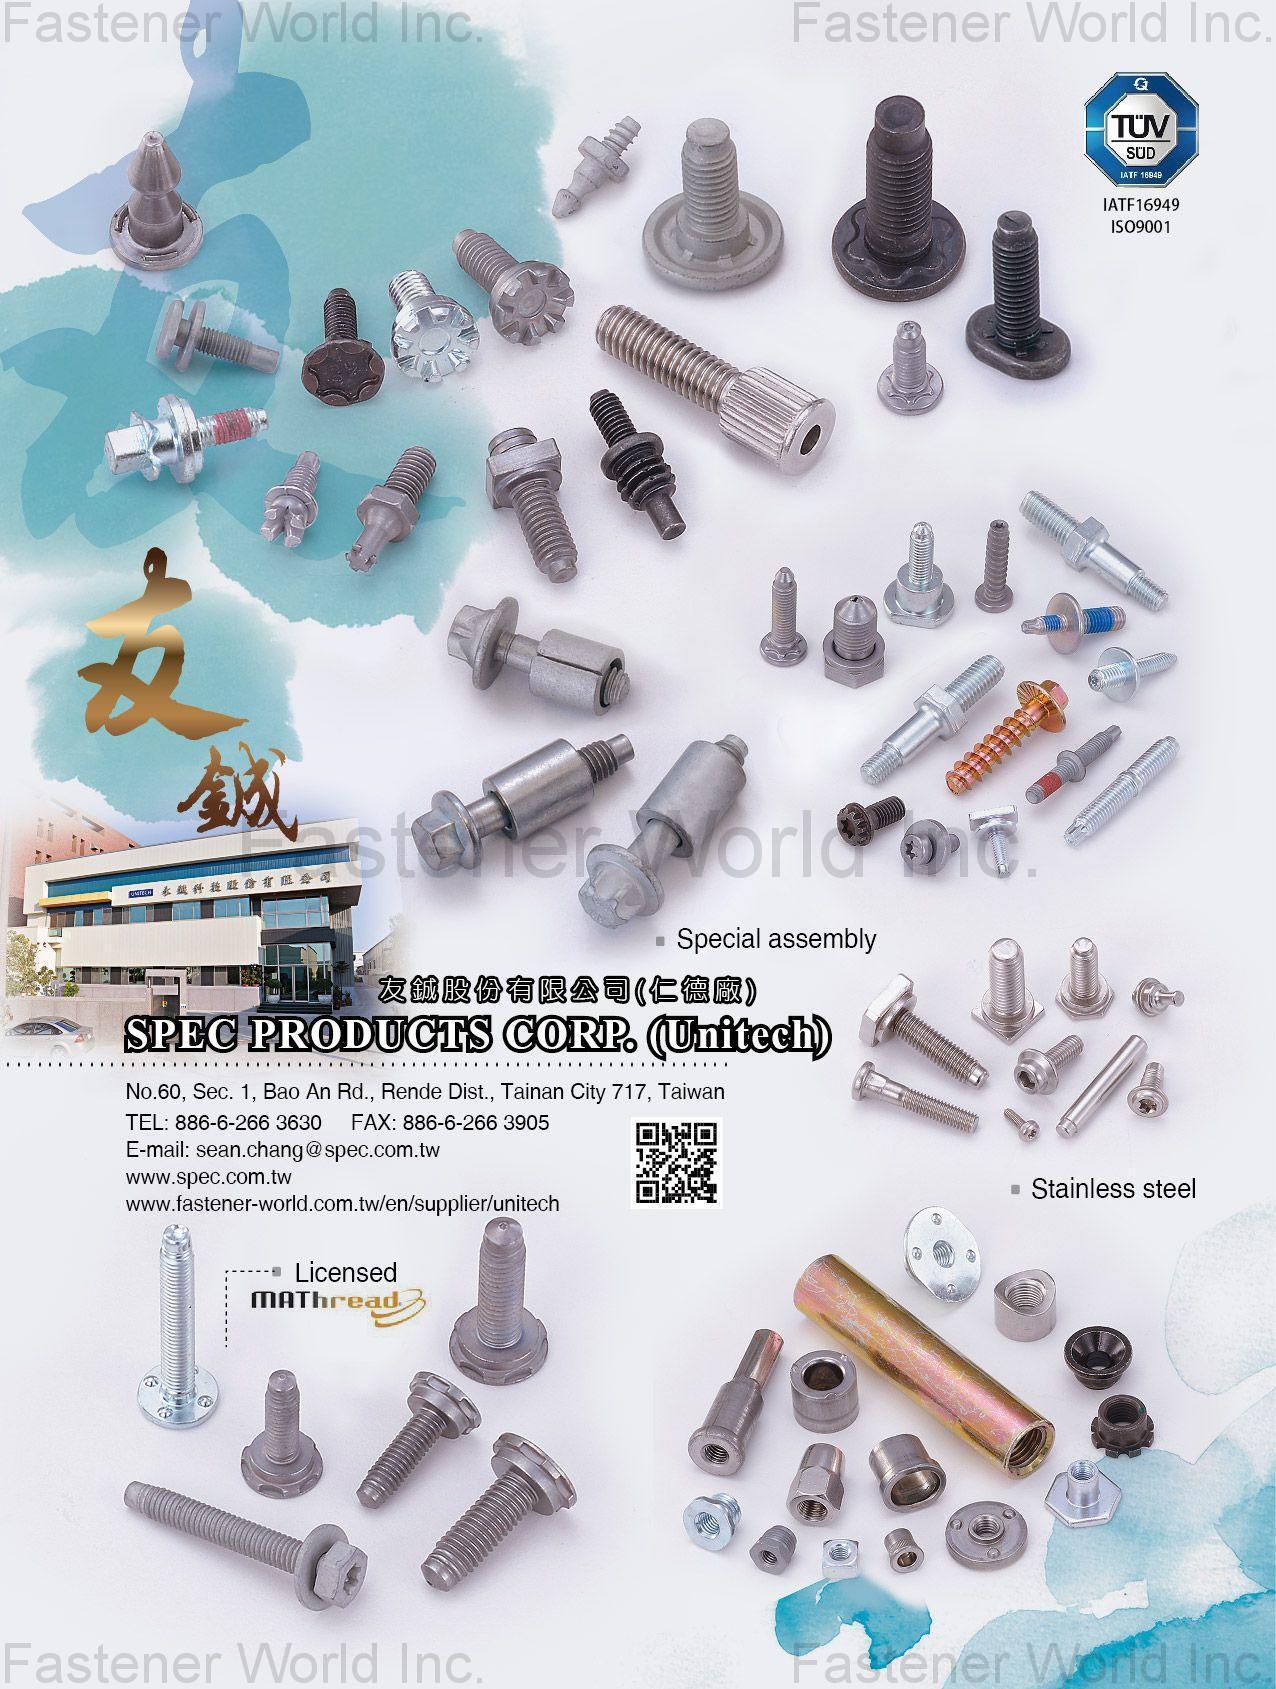 SPEC PRODUCTS CORP.-Unitech Factory , Bolt, Screw, Nut. Pin, Rivet, Spacer , Special Bolts